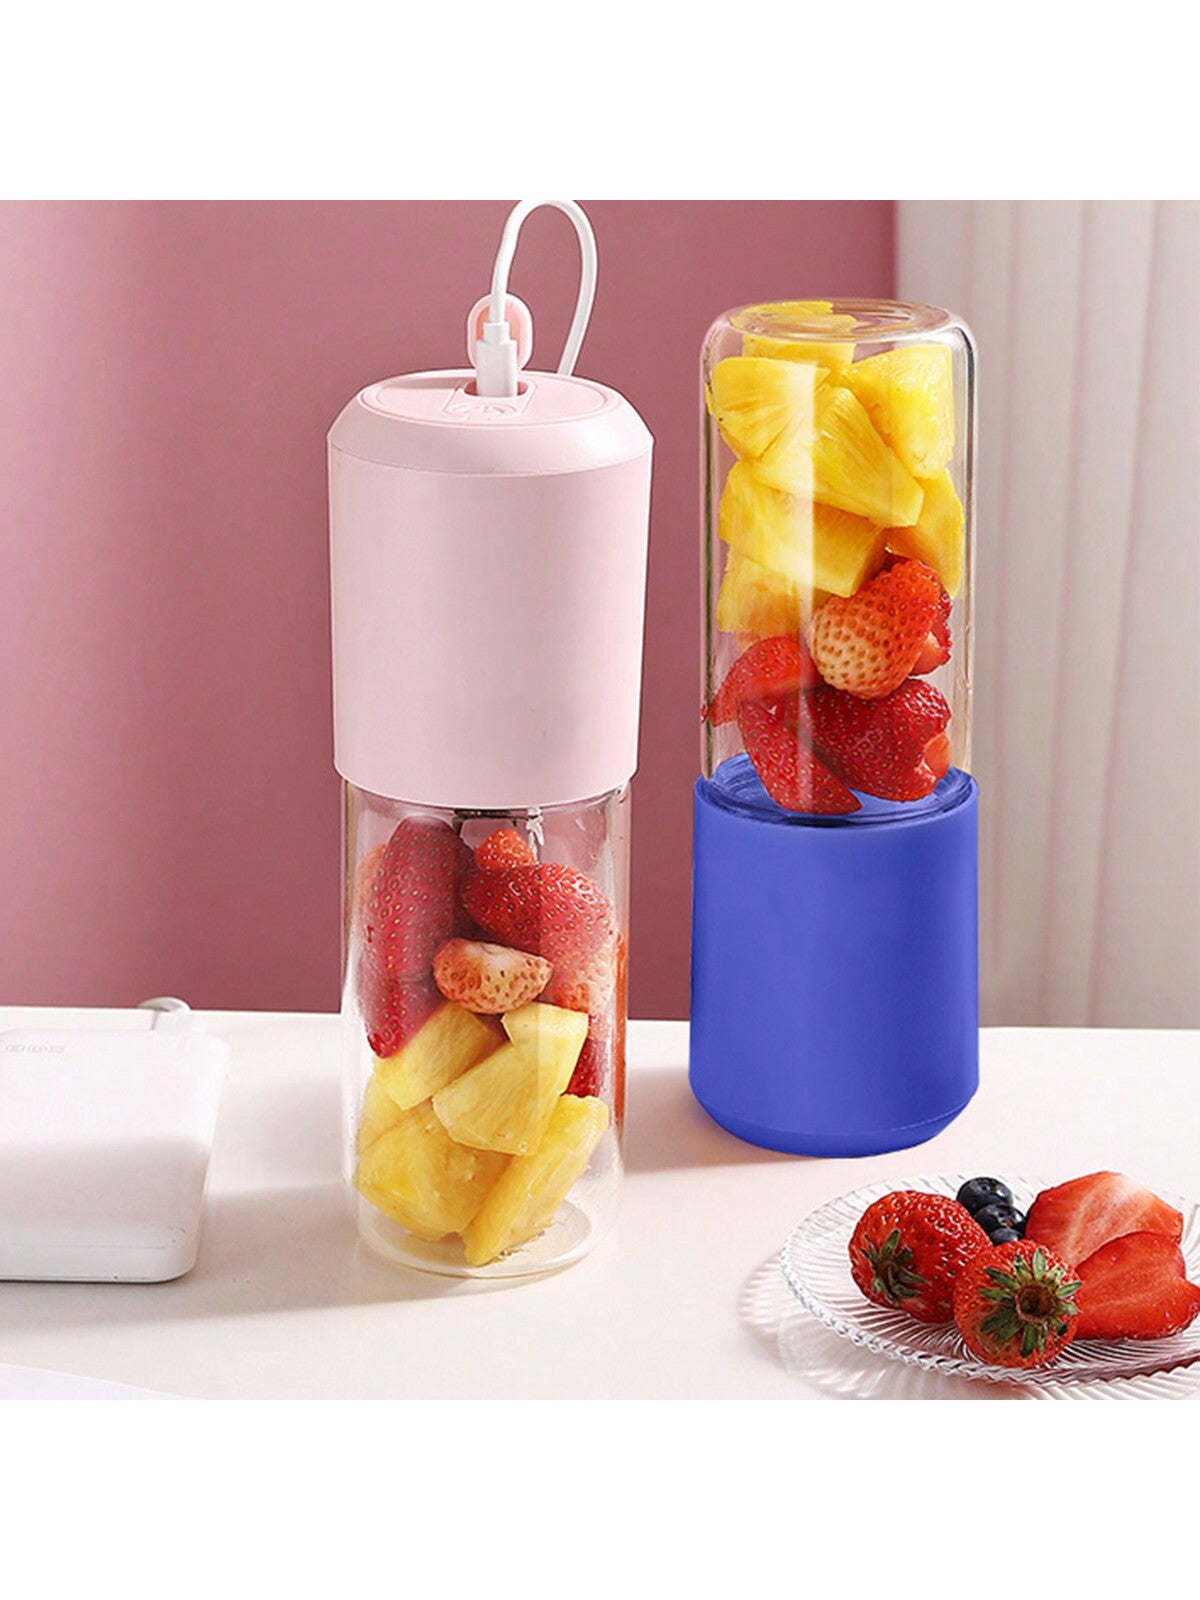 Portable Electric Juicer For Household Use, Mini Multifunctional Blender, Wireless Juice Cup-Blue-8